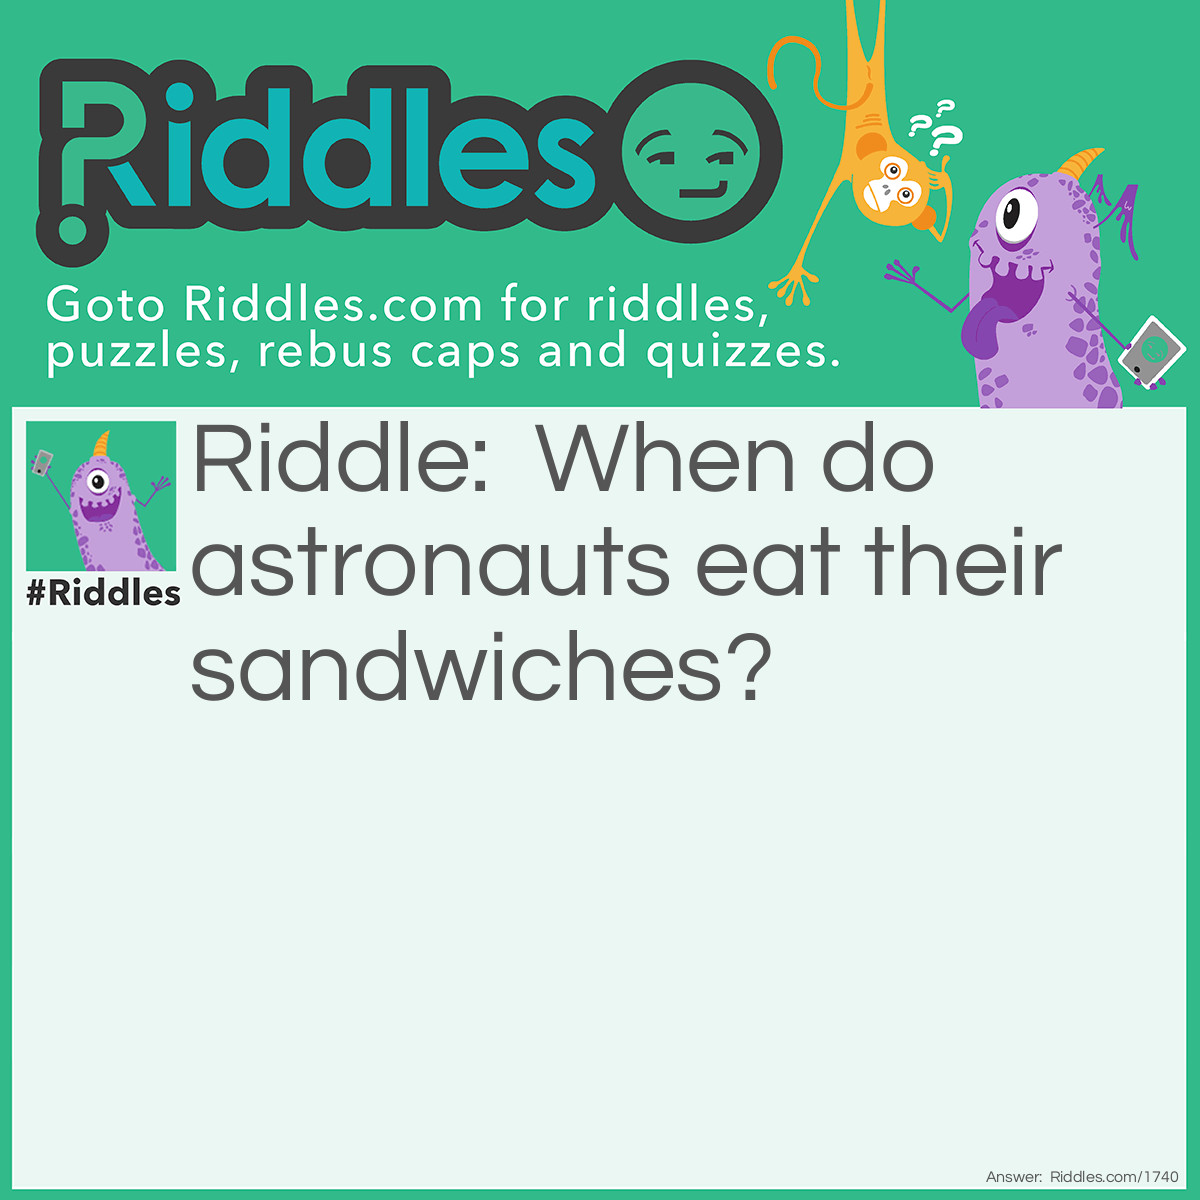 Riddle: When do astronauts eat their sandwiches? Answer: At launch time.